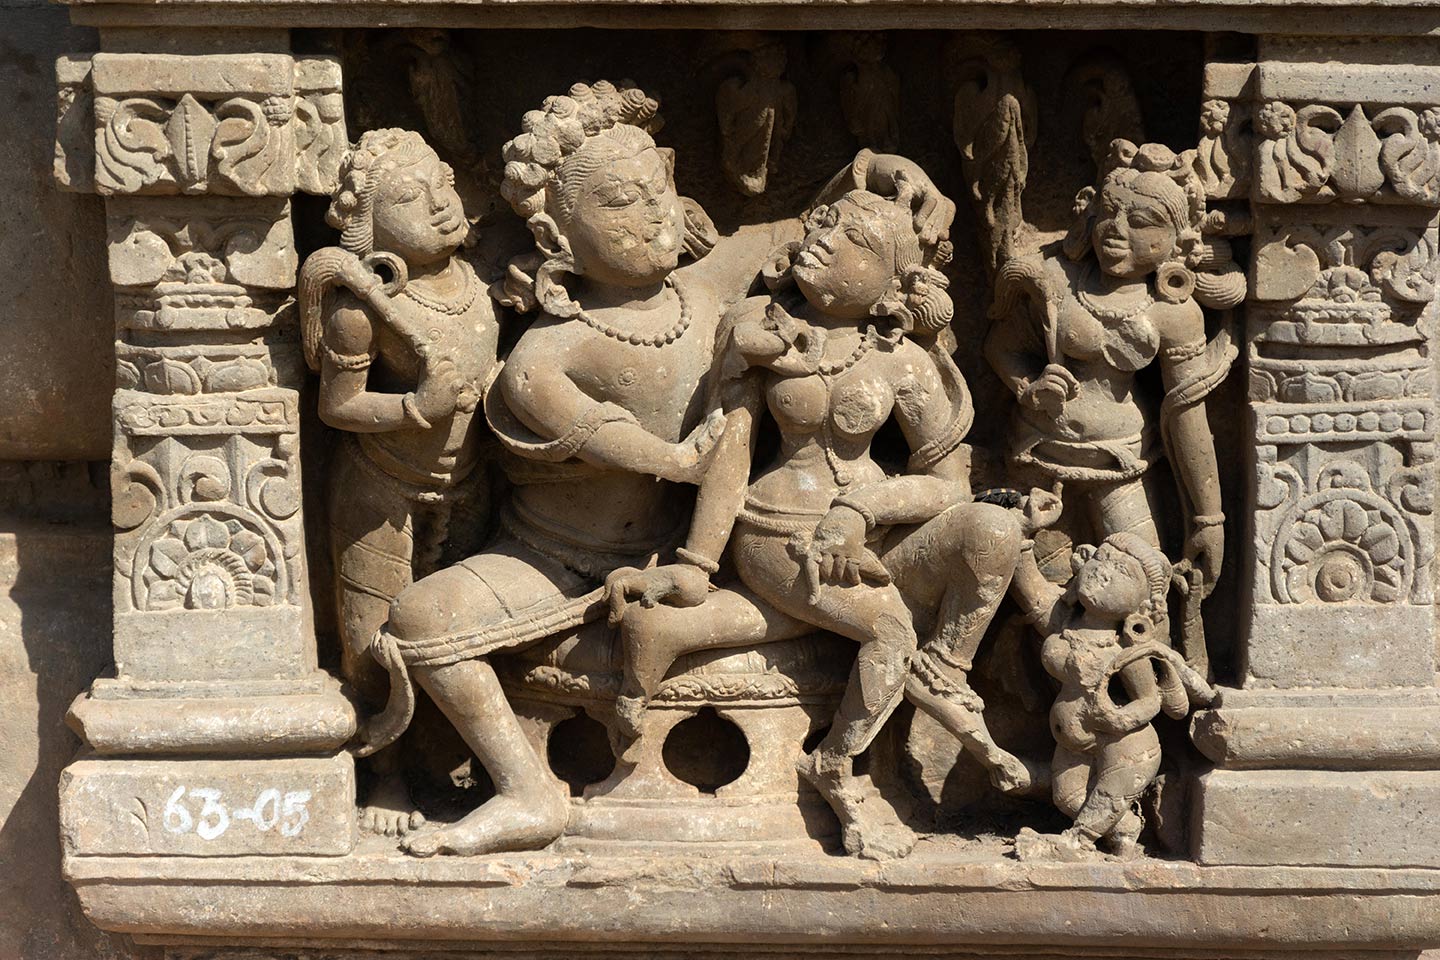 Couples invoking shringara rasa (associated with romance, love, and attractiveness between lovers) are framed in panels with pillars and tiered shikhara with gavaksha (horseshoe) motifs. The central male figure is seated in the lalitasana pose on a raised seat. The central female figure is seated on his left thigh, looking towards the man with her head turned. The man is admiring the beauty of the woman, placing his left hand on her coiffure and inspecting her face with his left hand (missing).